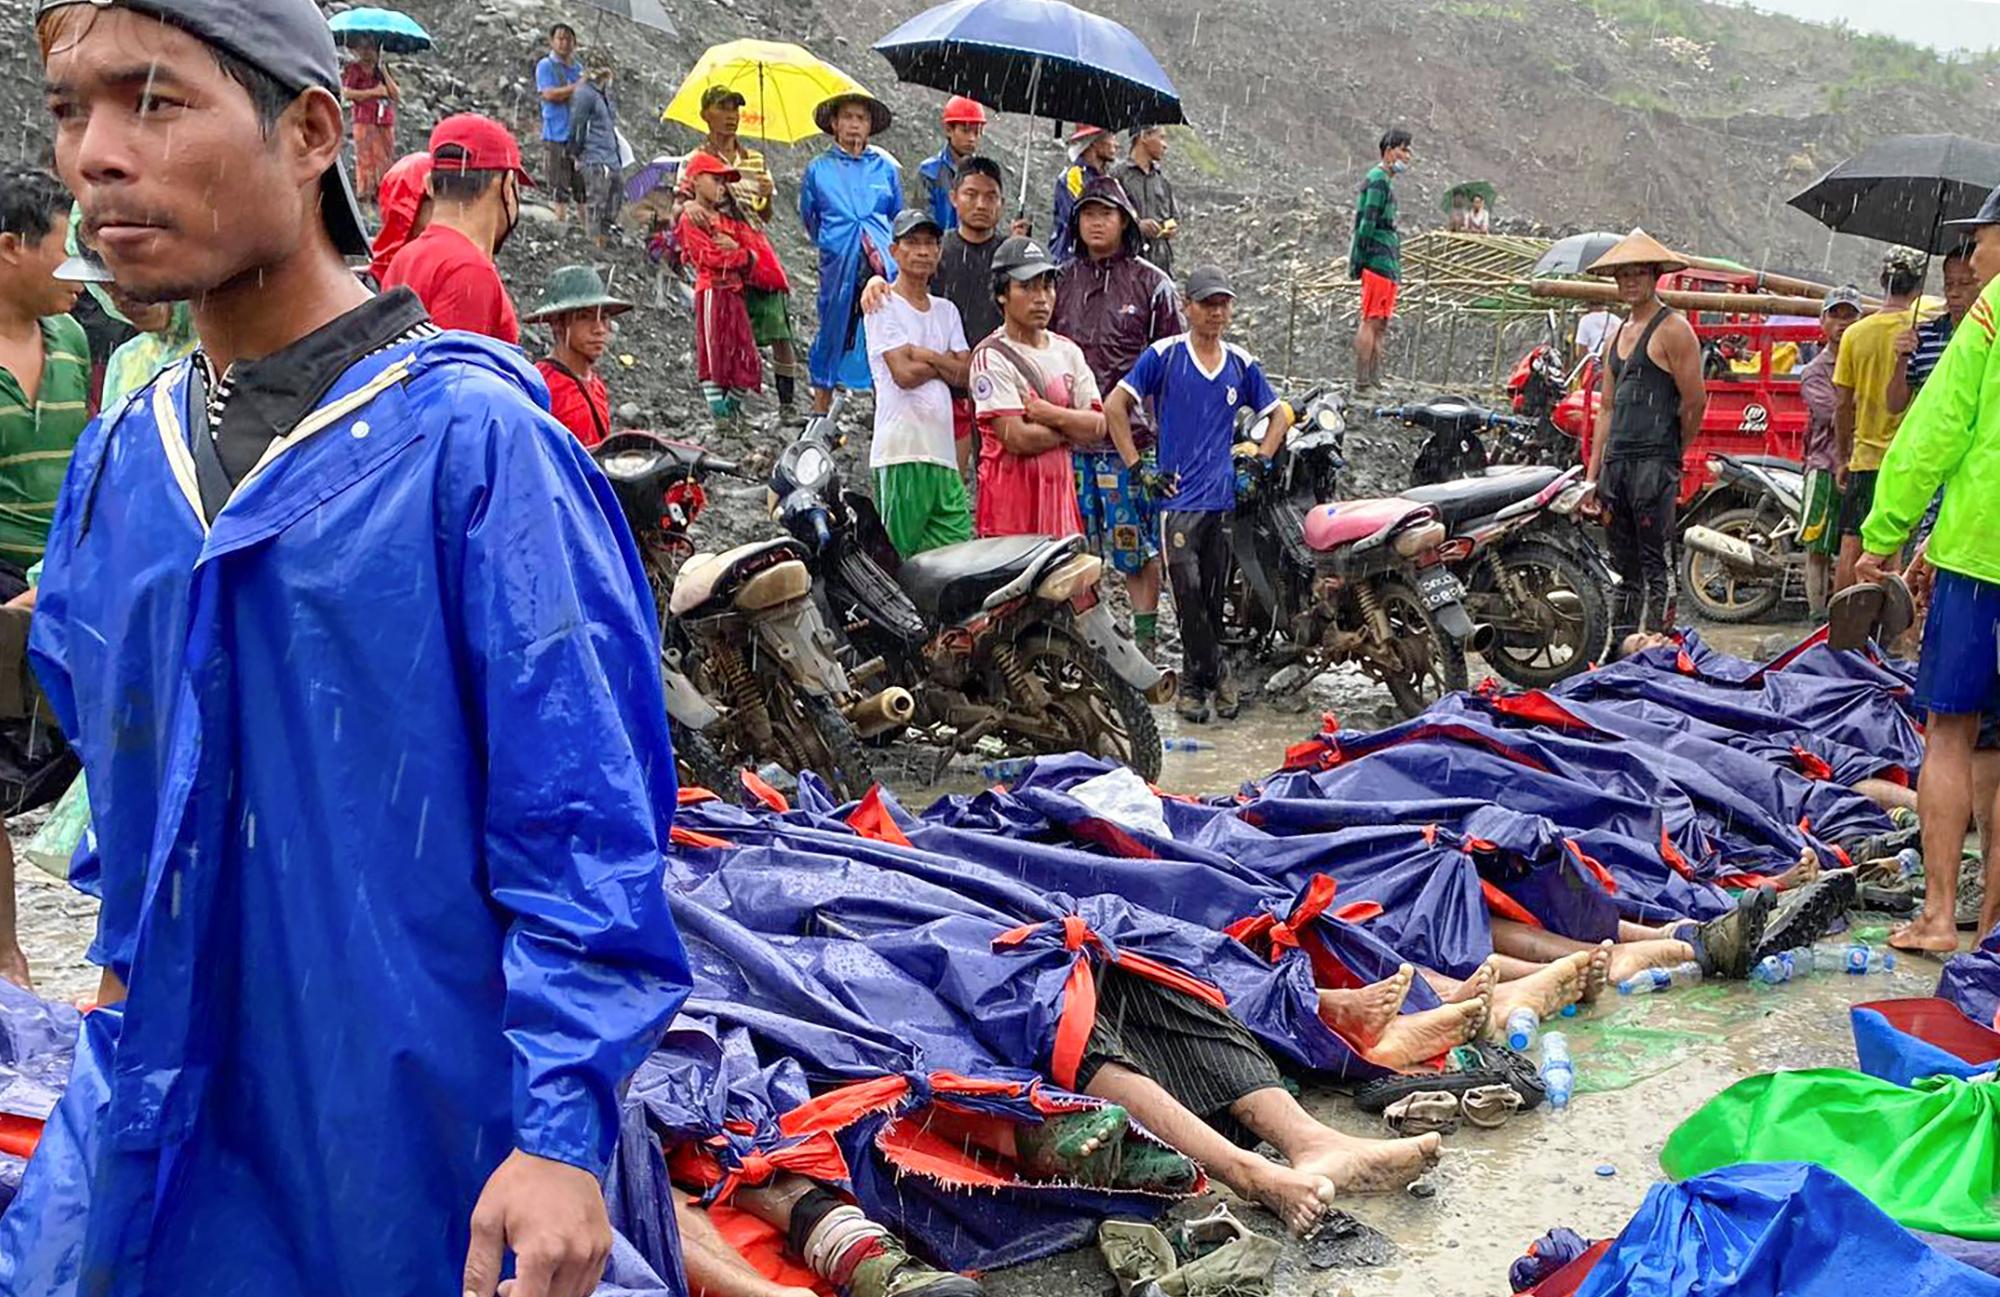 People gather near the bodies of victims in the jade mining area of Hpakant, Kachin state, northern Myanmar